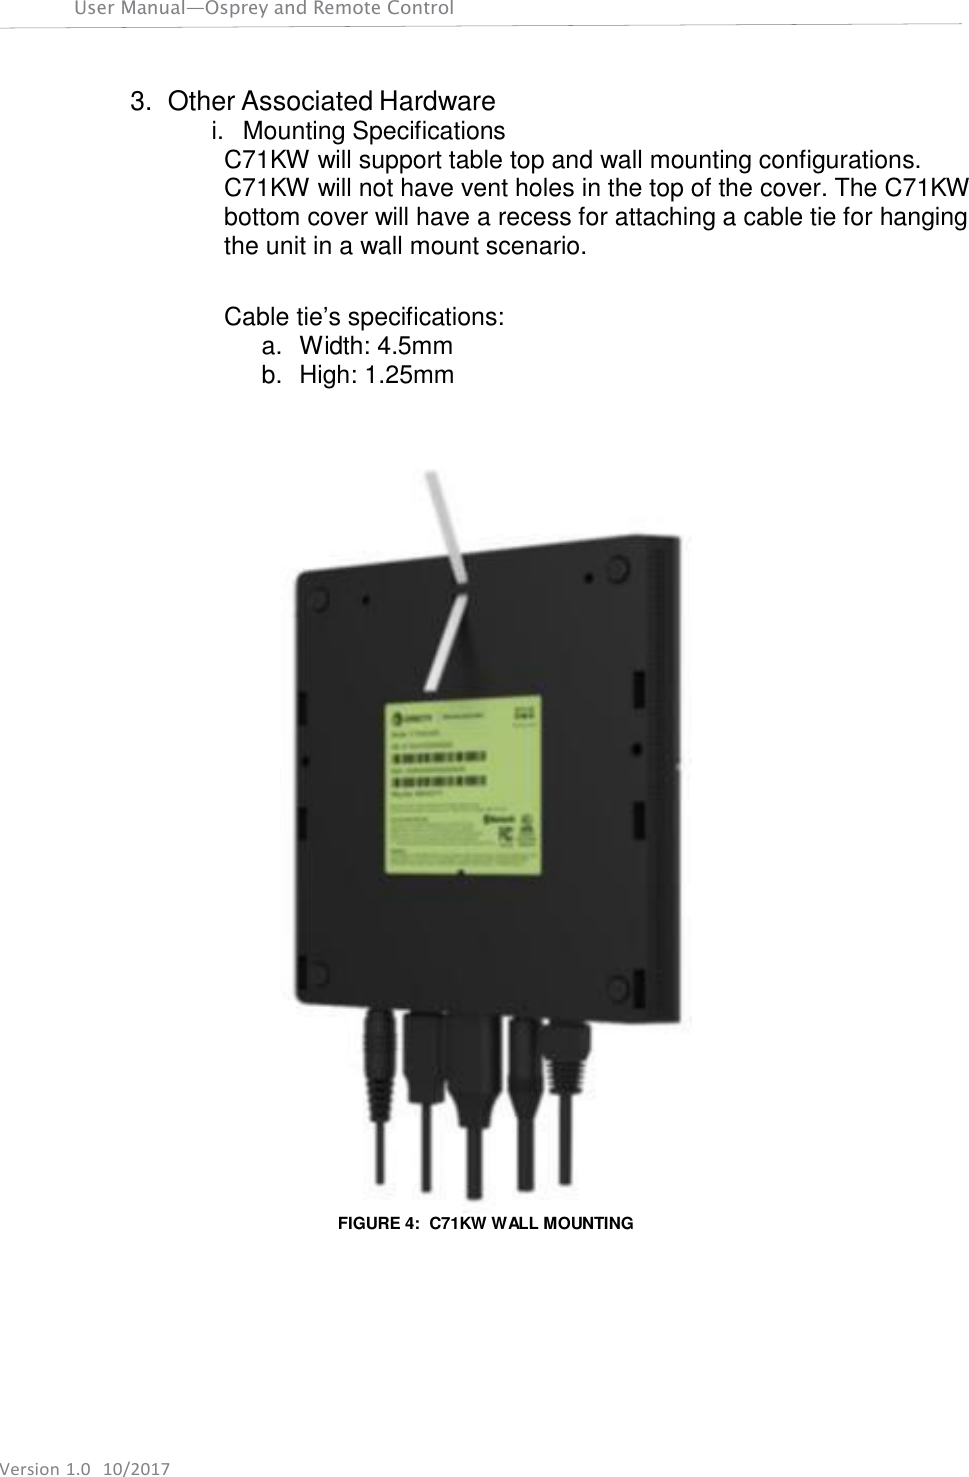 Version 1.0  10/2017 User Manual—Osprey and Remote Control     3. Other Associated Hardware i.  Mounting Specifications C71KW will support table top and wall mounting configurations. C71KW will not have vent holes in the top of the cover. The C71KW bottom cover will have a recess for attaching a cable tie for hanging the unit in a wall mount scenario.   Cable tie’s specifications: a.  Width: 4.5mm b.  High: 1.25mm      FIGURE 4:  C71KW WALL MOUNTING 